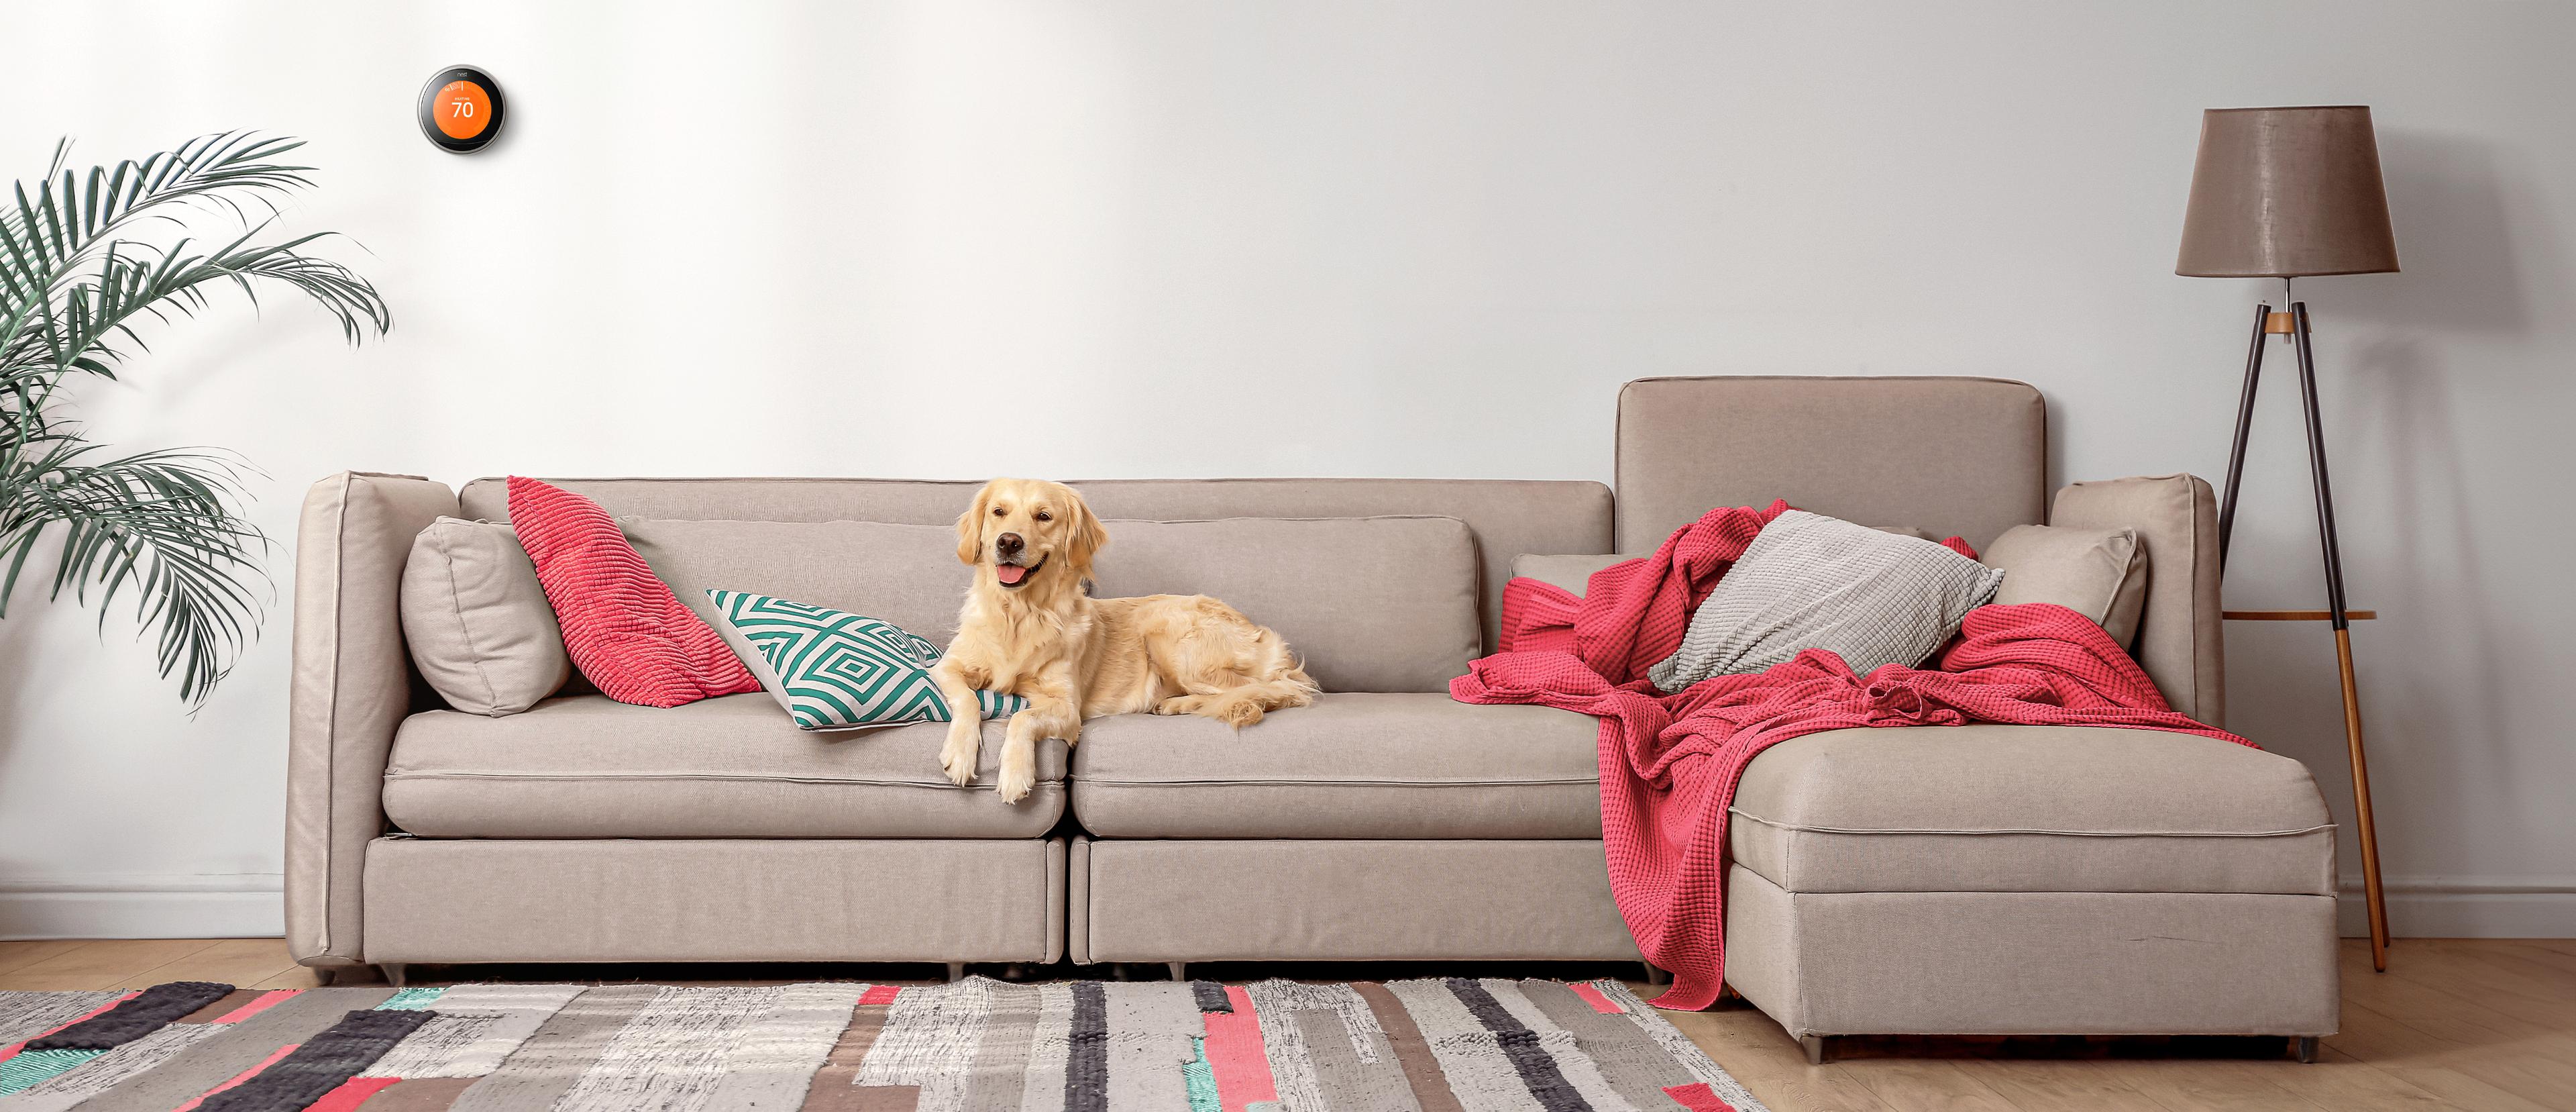 A dog is sitting on a sofa. There is a thermostat on the wall, a plant at the left corner and a lamp at the right corner. An alert pops out with the title: 'Energy usage alert' and its message content reads: 'Congrats! You've met your energy conservation goal.'